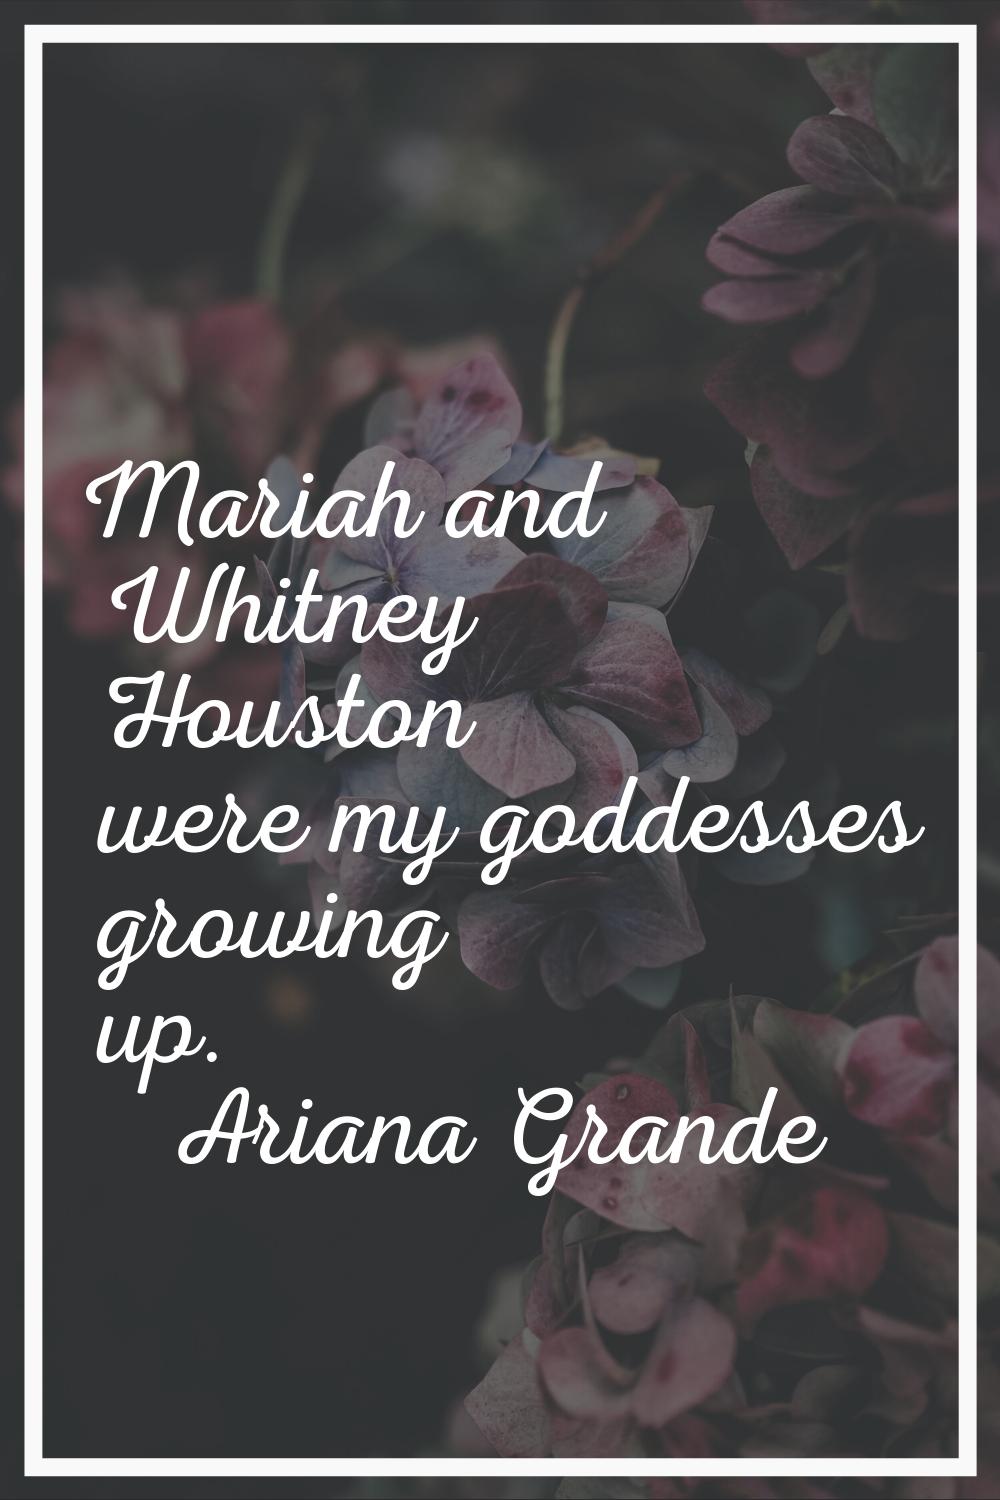 Mariah and Whitney Houston were my goddesses growing up.